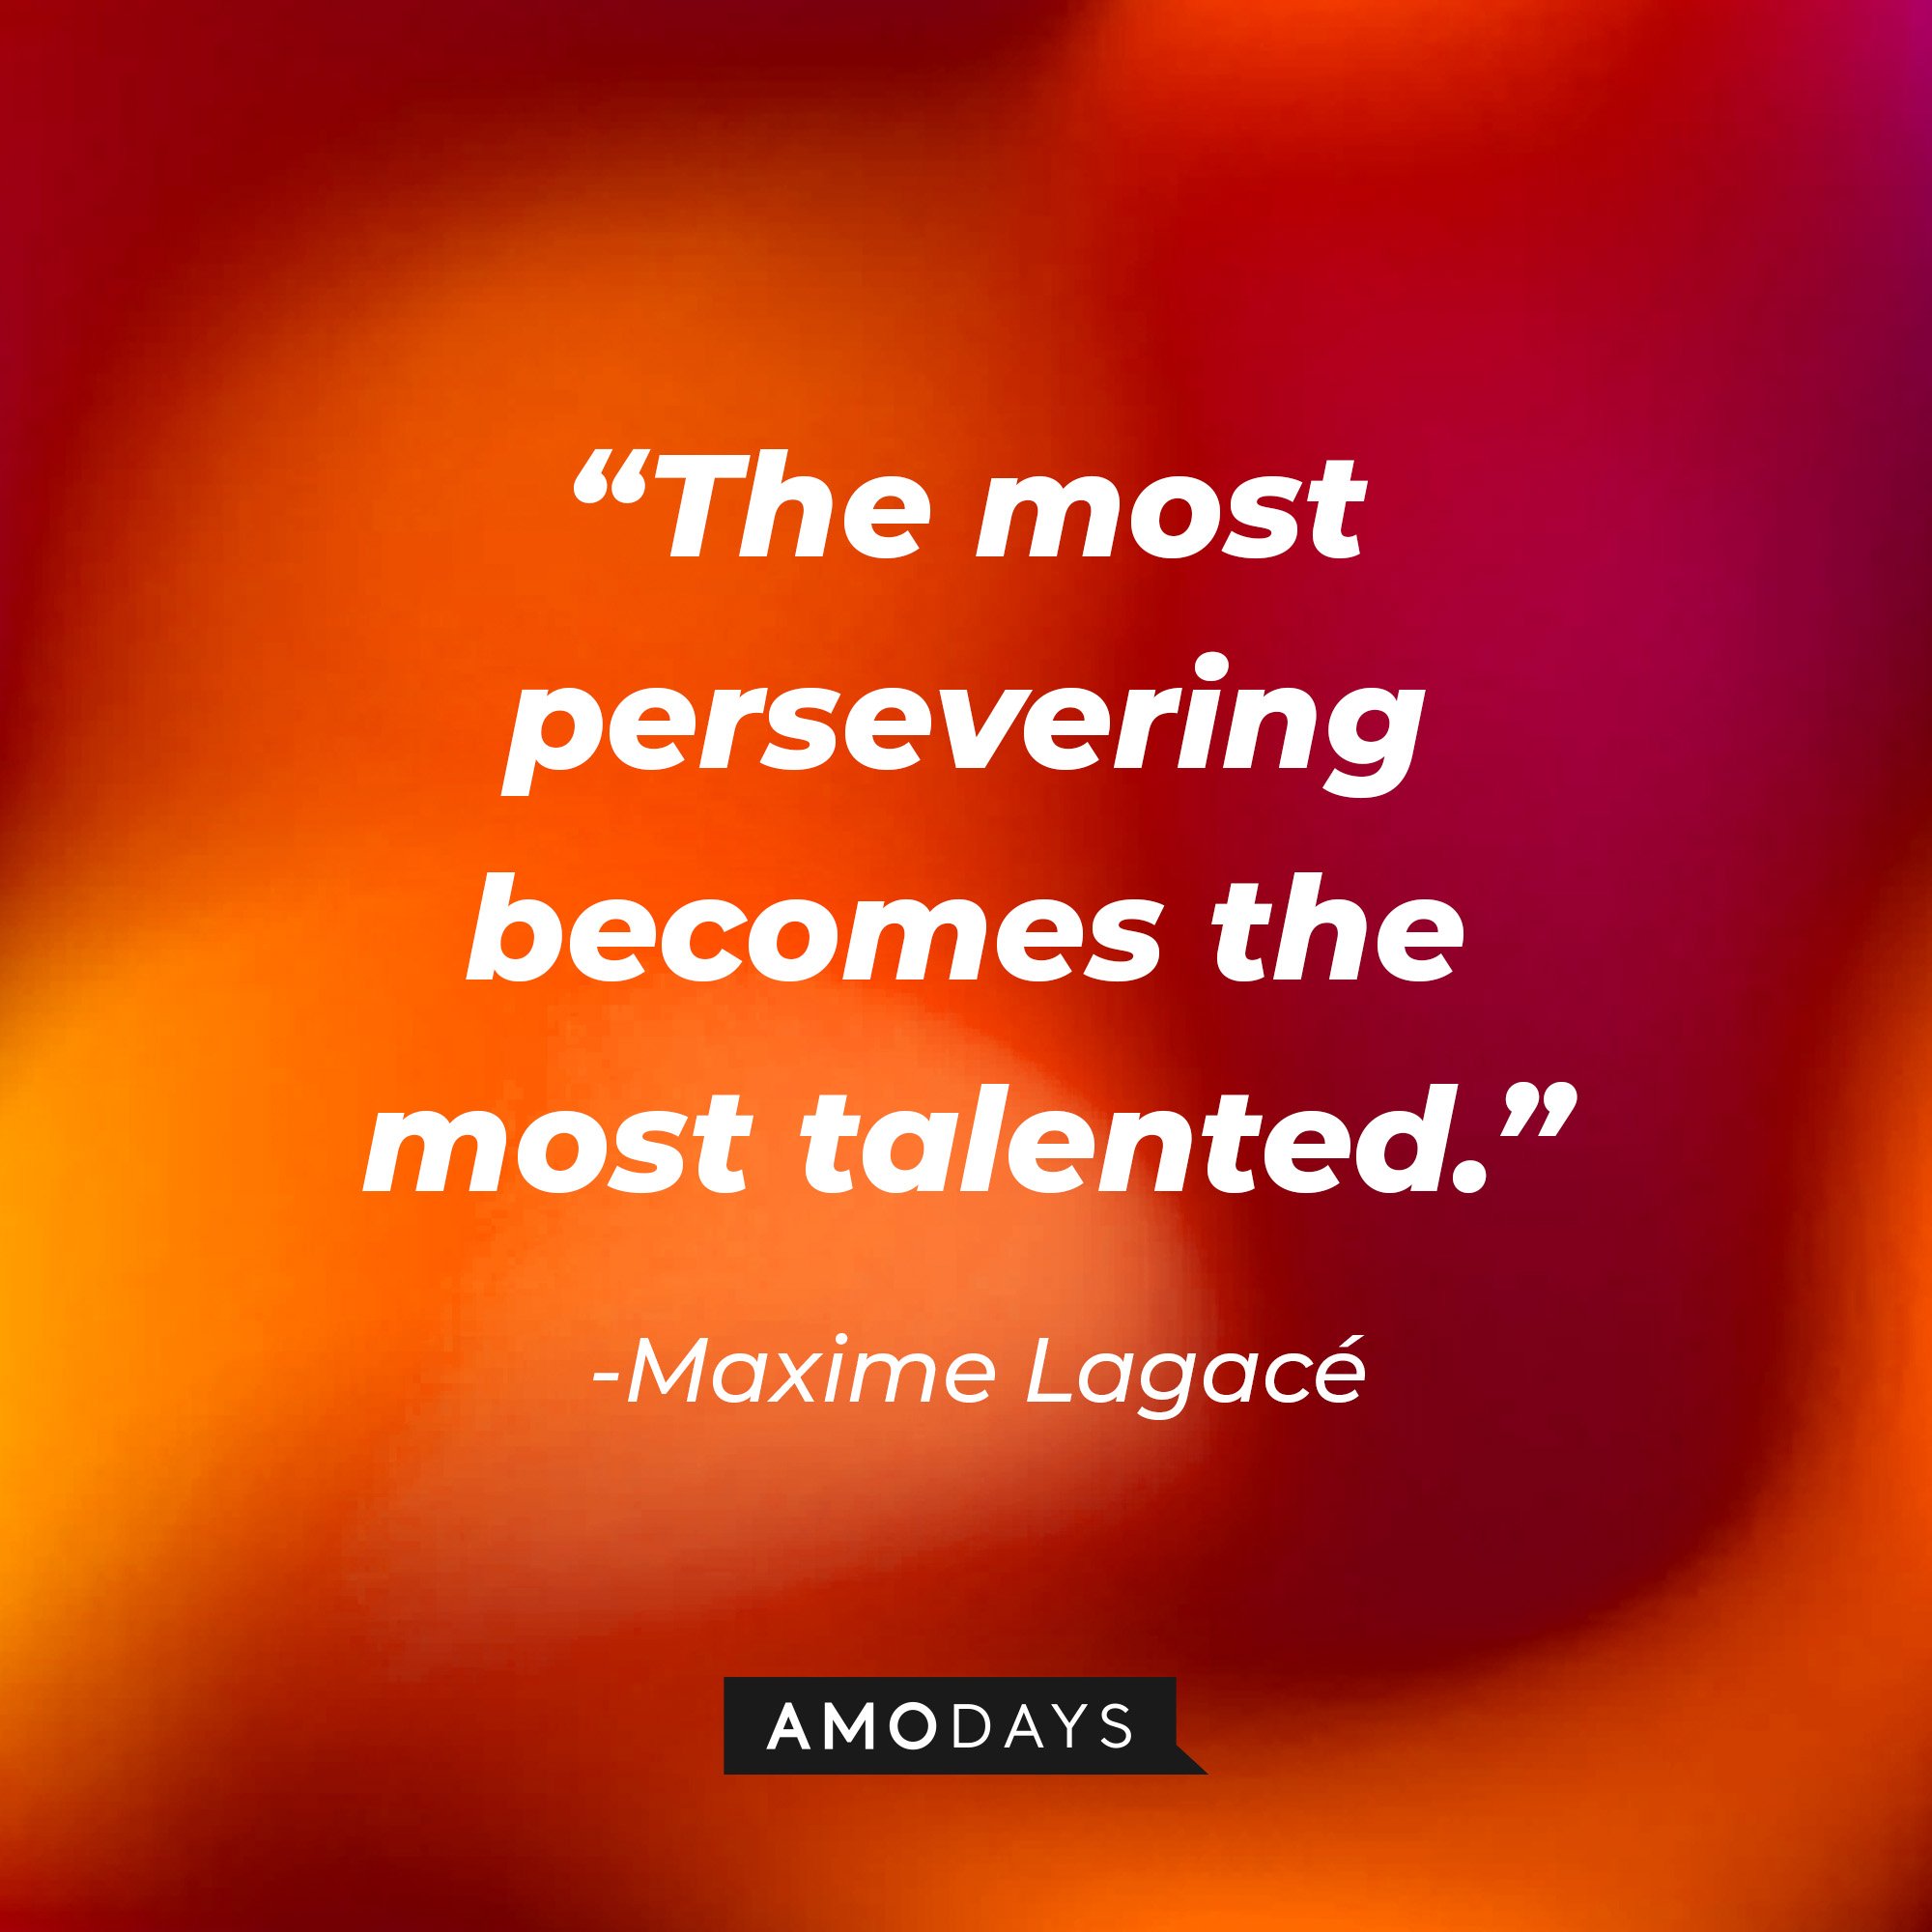 Maxime Lagacé's quote: “The most persevering becomes the most talented.” | Image: AmoDays